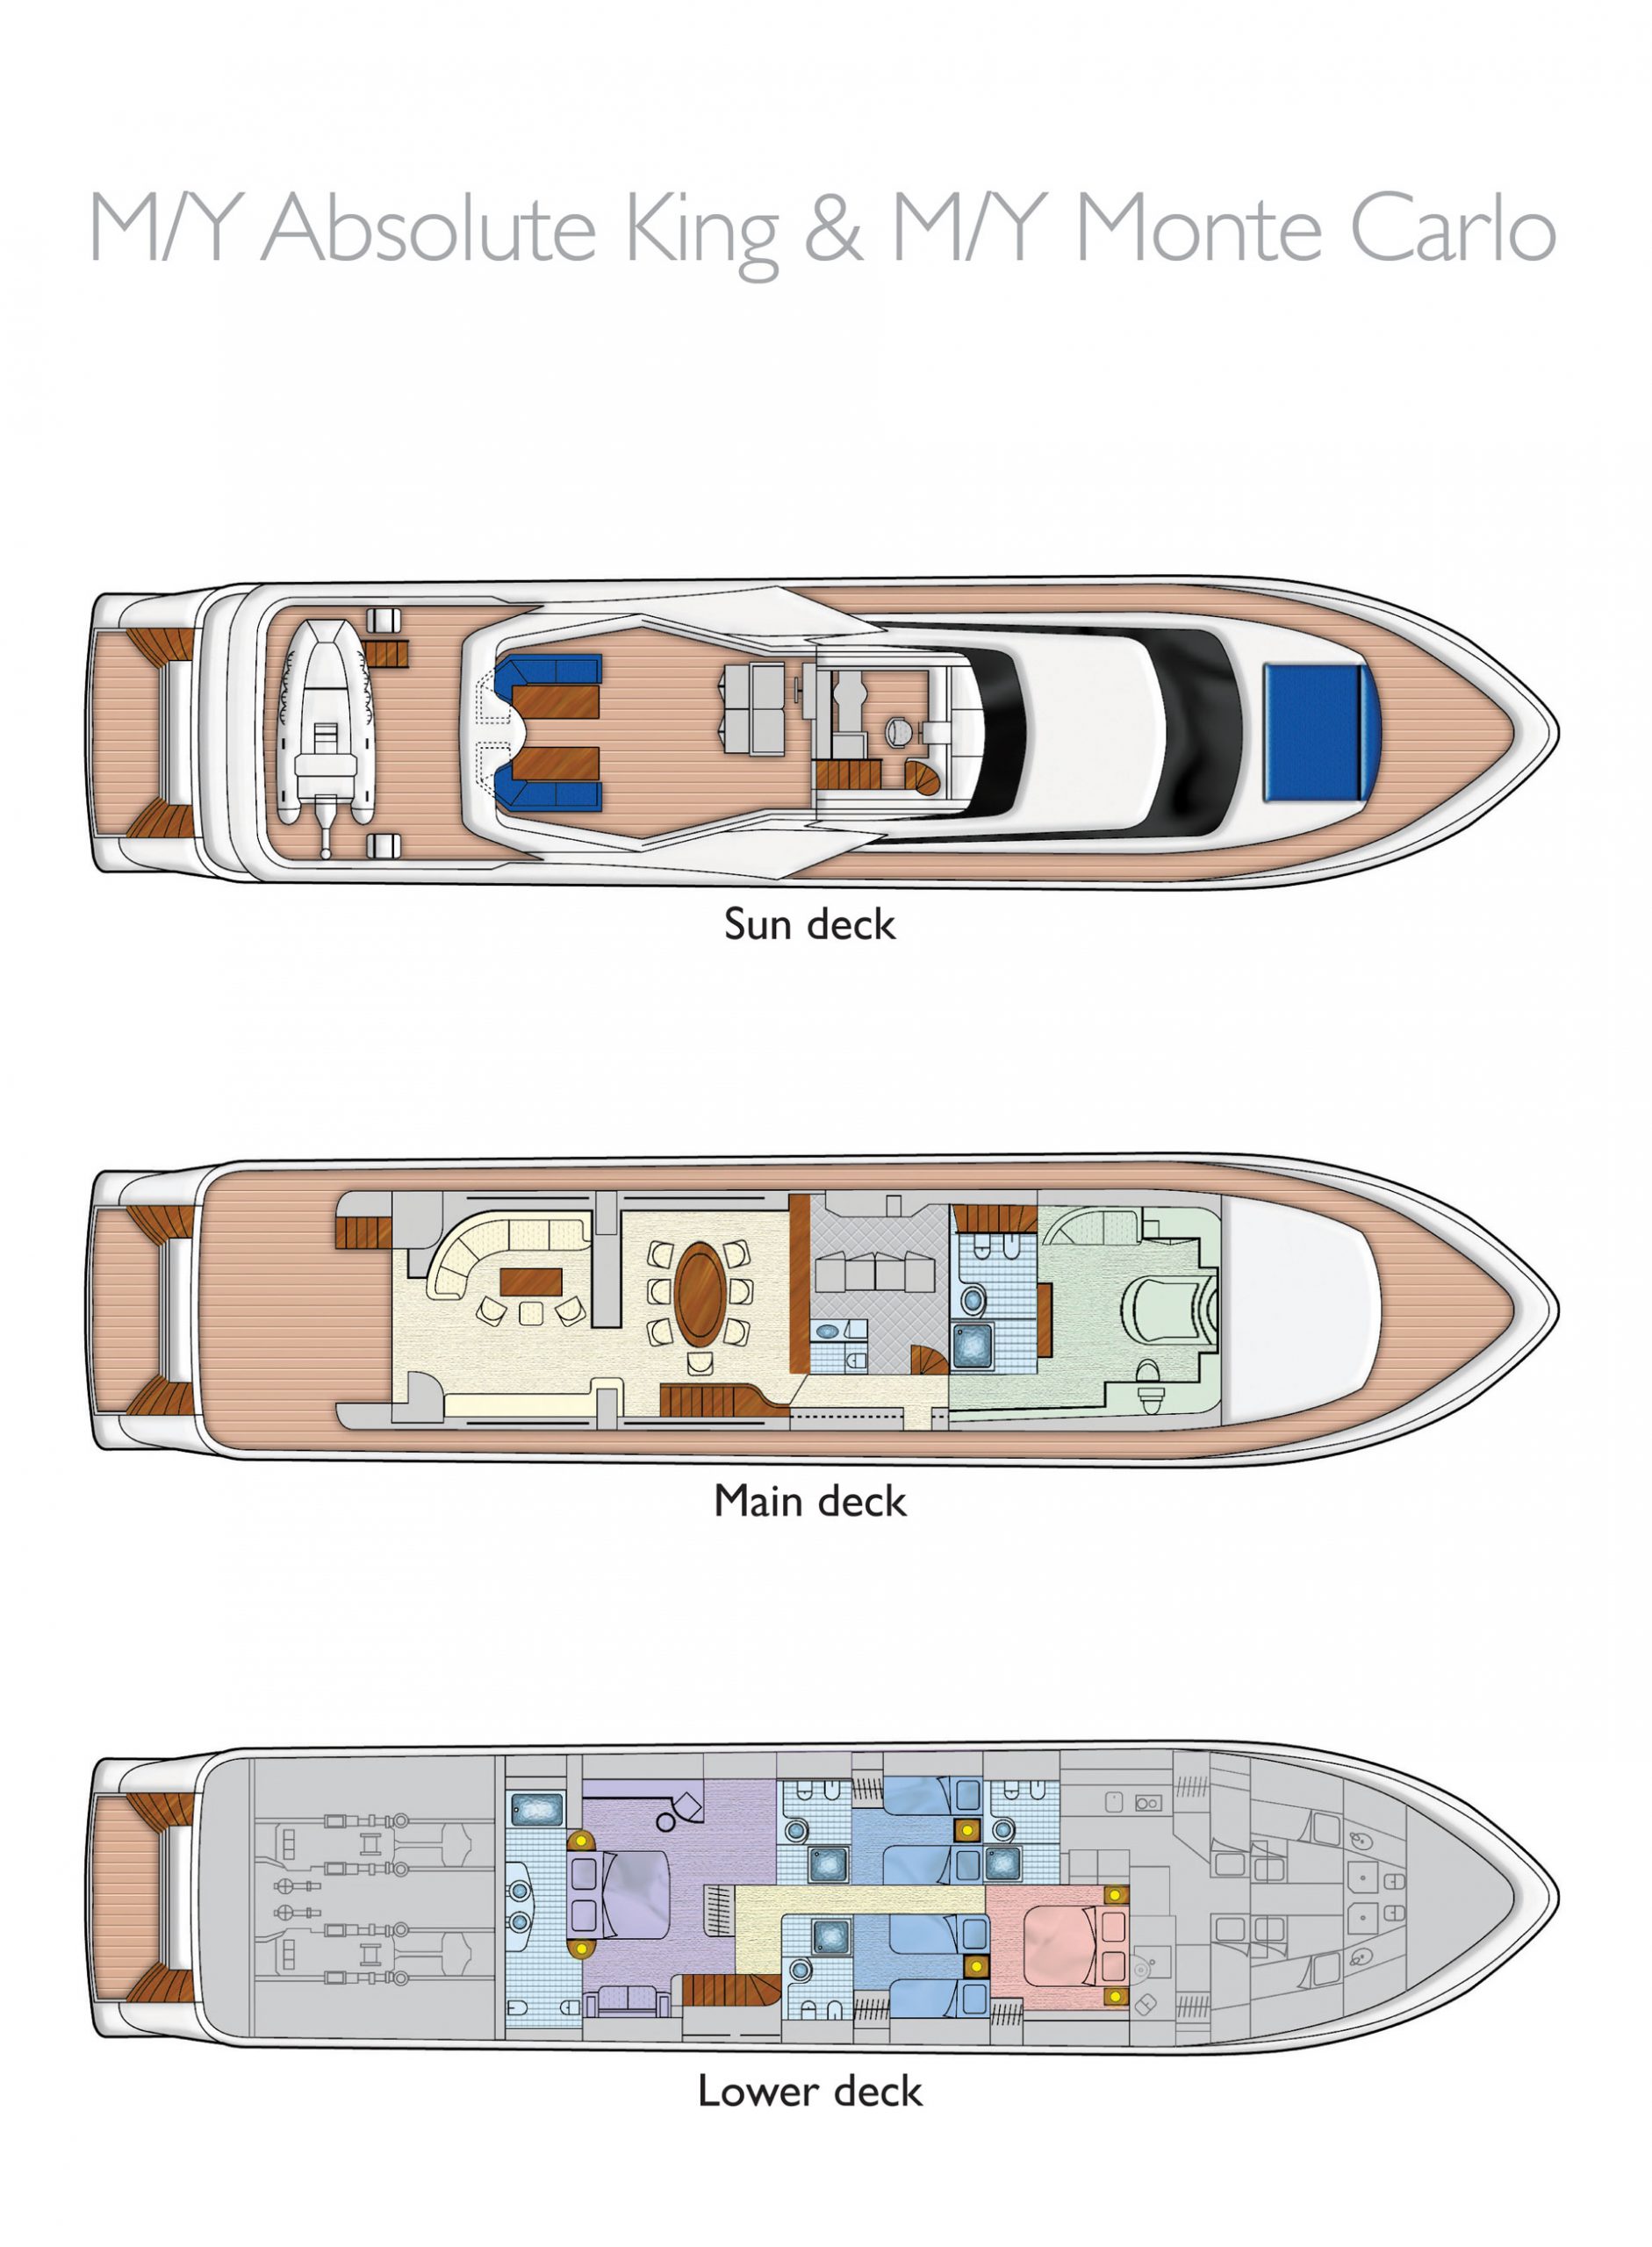 Deck plan of Monte Carlo & Absolute King private charter yachts in Greece, with 3 passenger decks, 5 cabins, lounge & dining area.